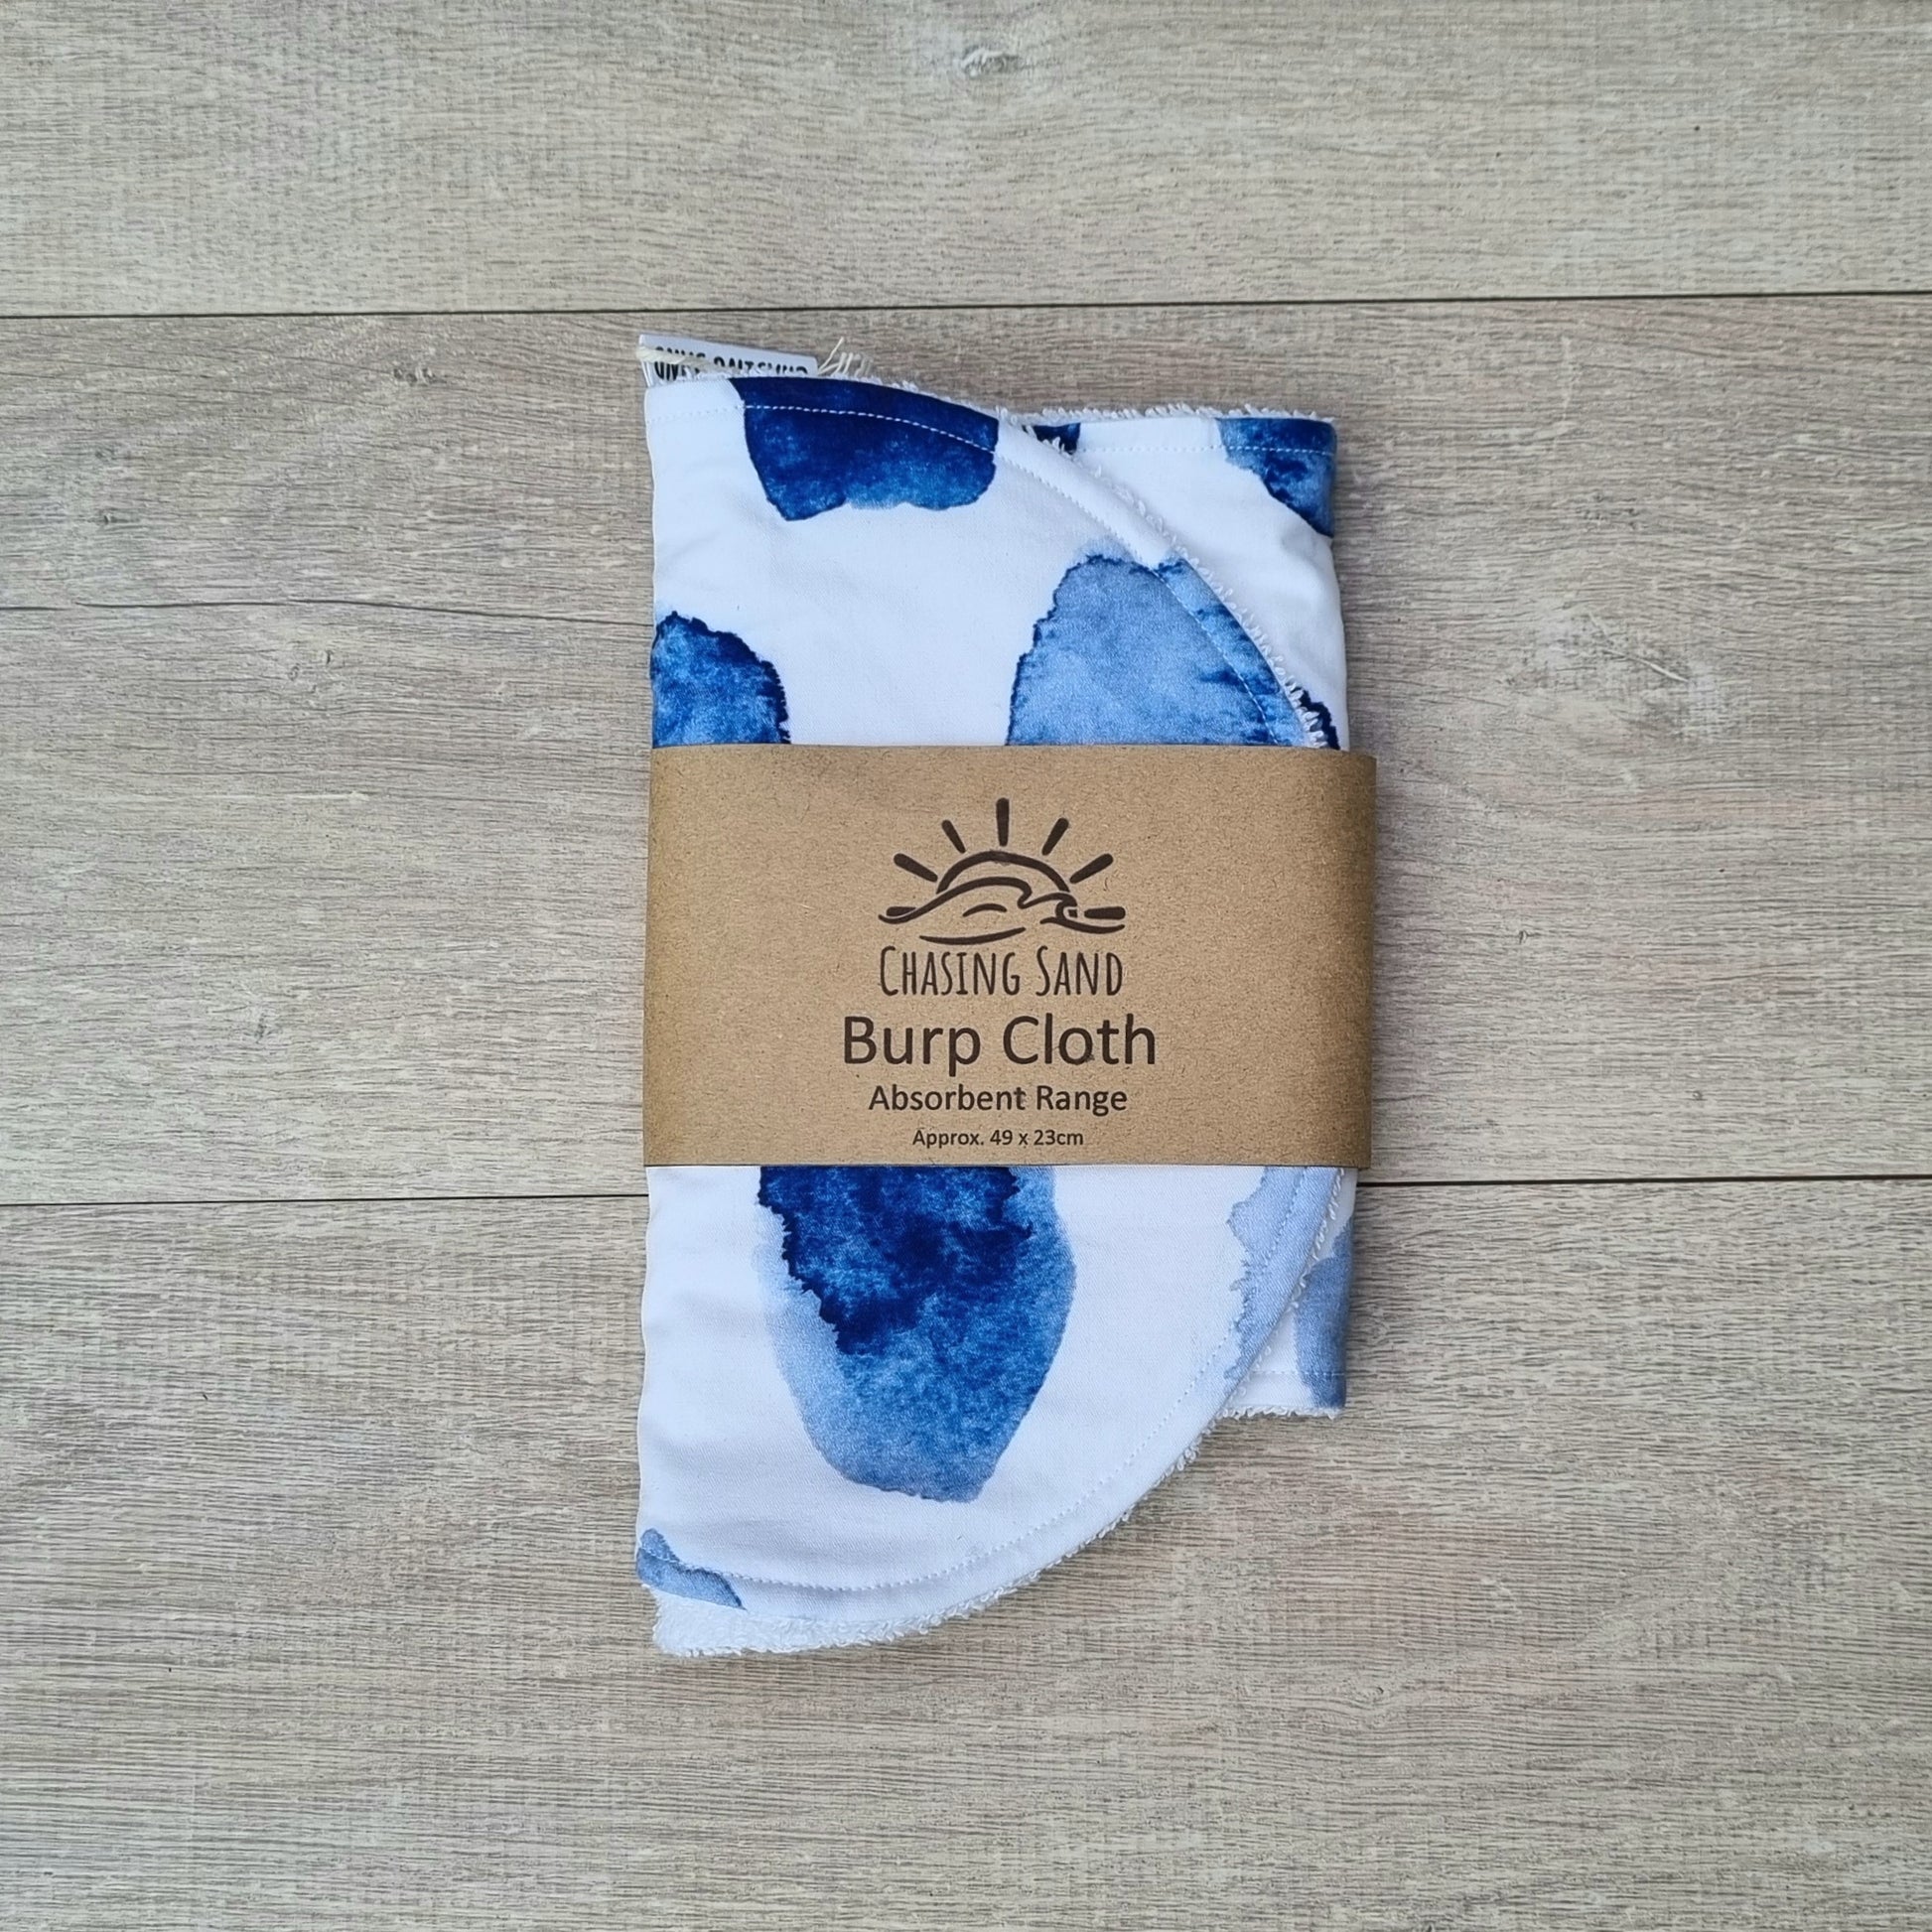 Burp Cloth - Watercolour against wooden backdrop. Blue watercolour patches on white background.